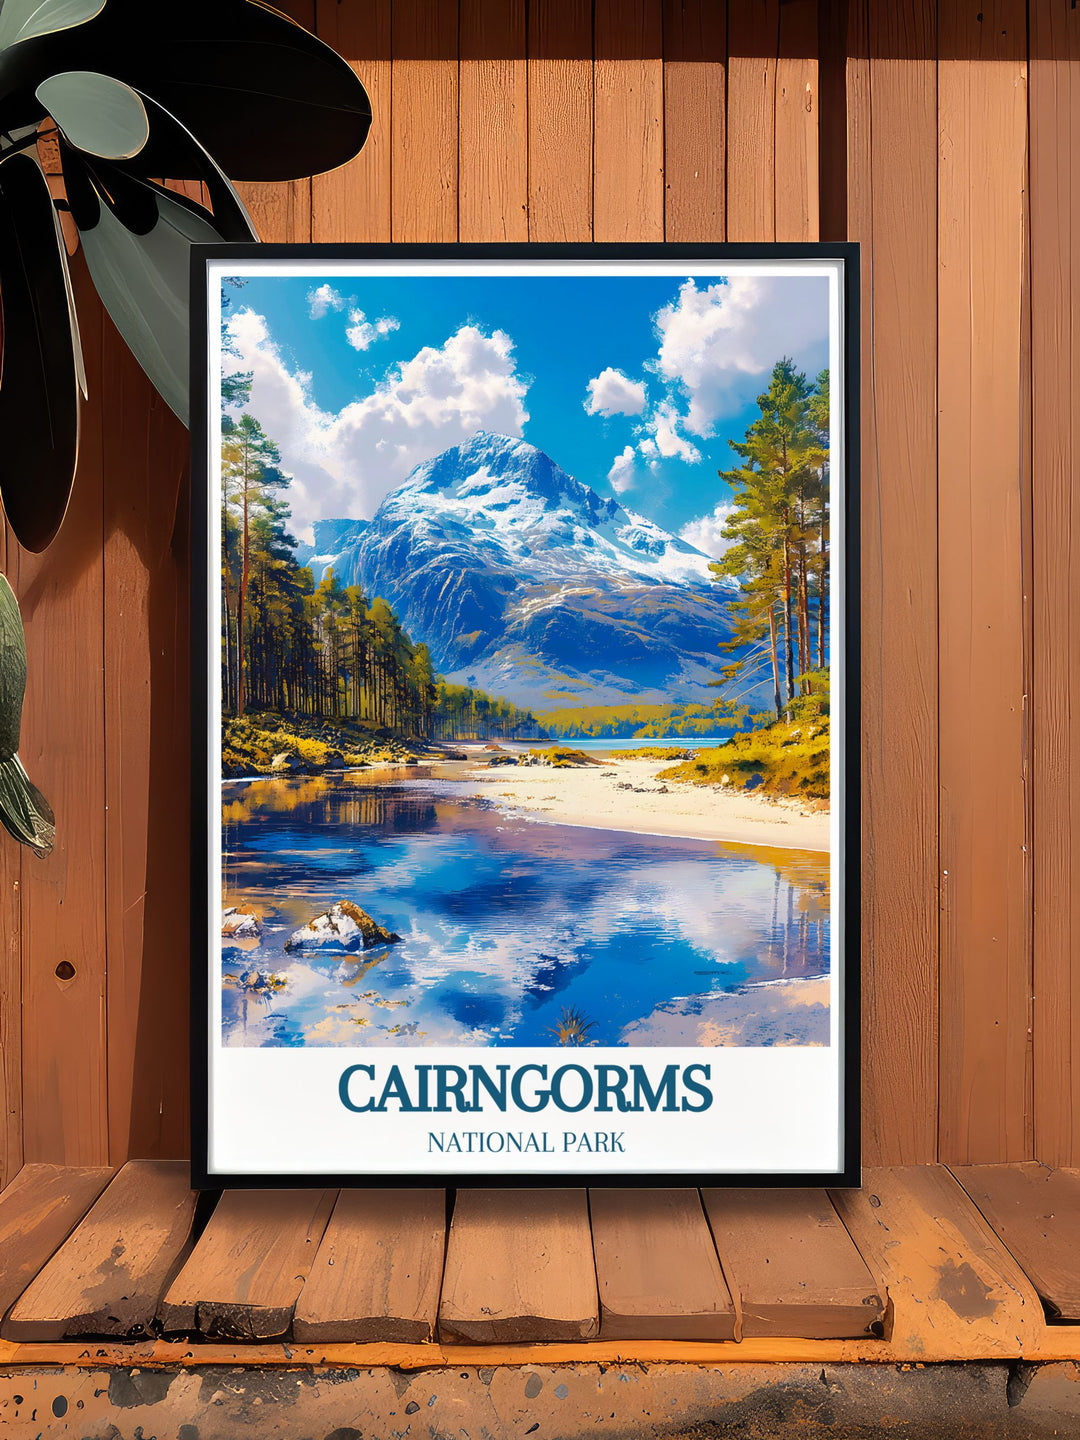 The picturesque scenery of Cairngorms National Park and the rugged allure of Cairngorm Mountain are featured in this vibrant travel poster, perfect for adding Scotlands unique charm and heritage to your home.